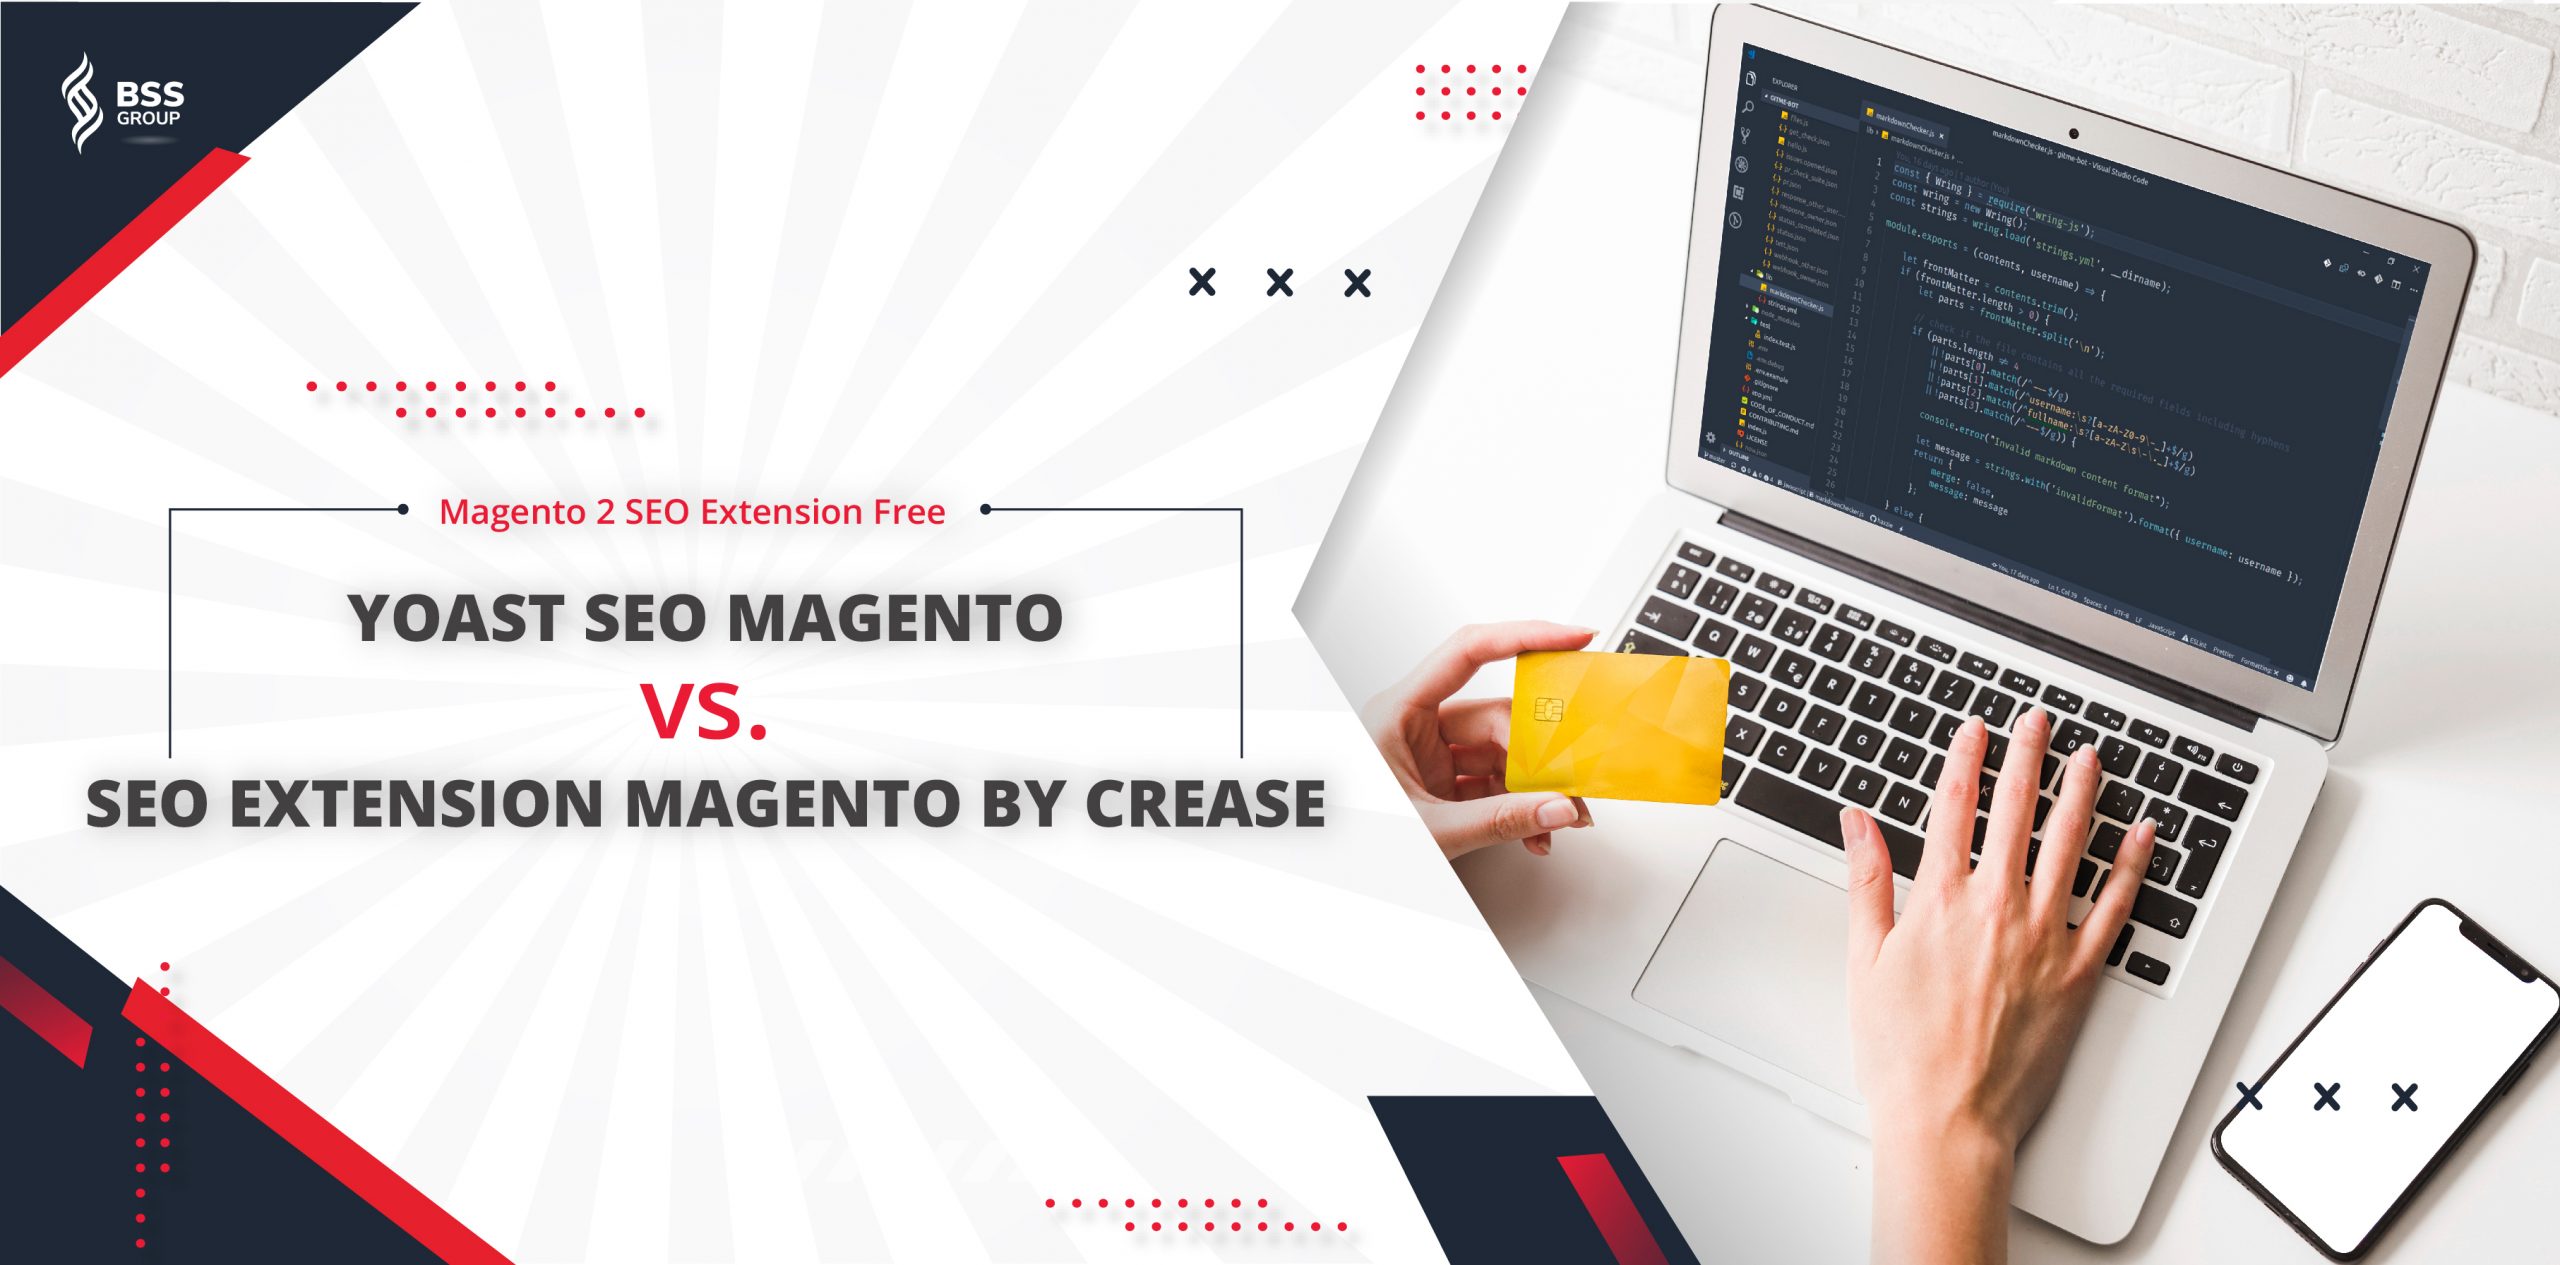 magento-seo-extension-free-compared-and-rated